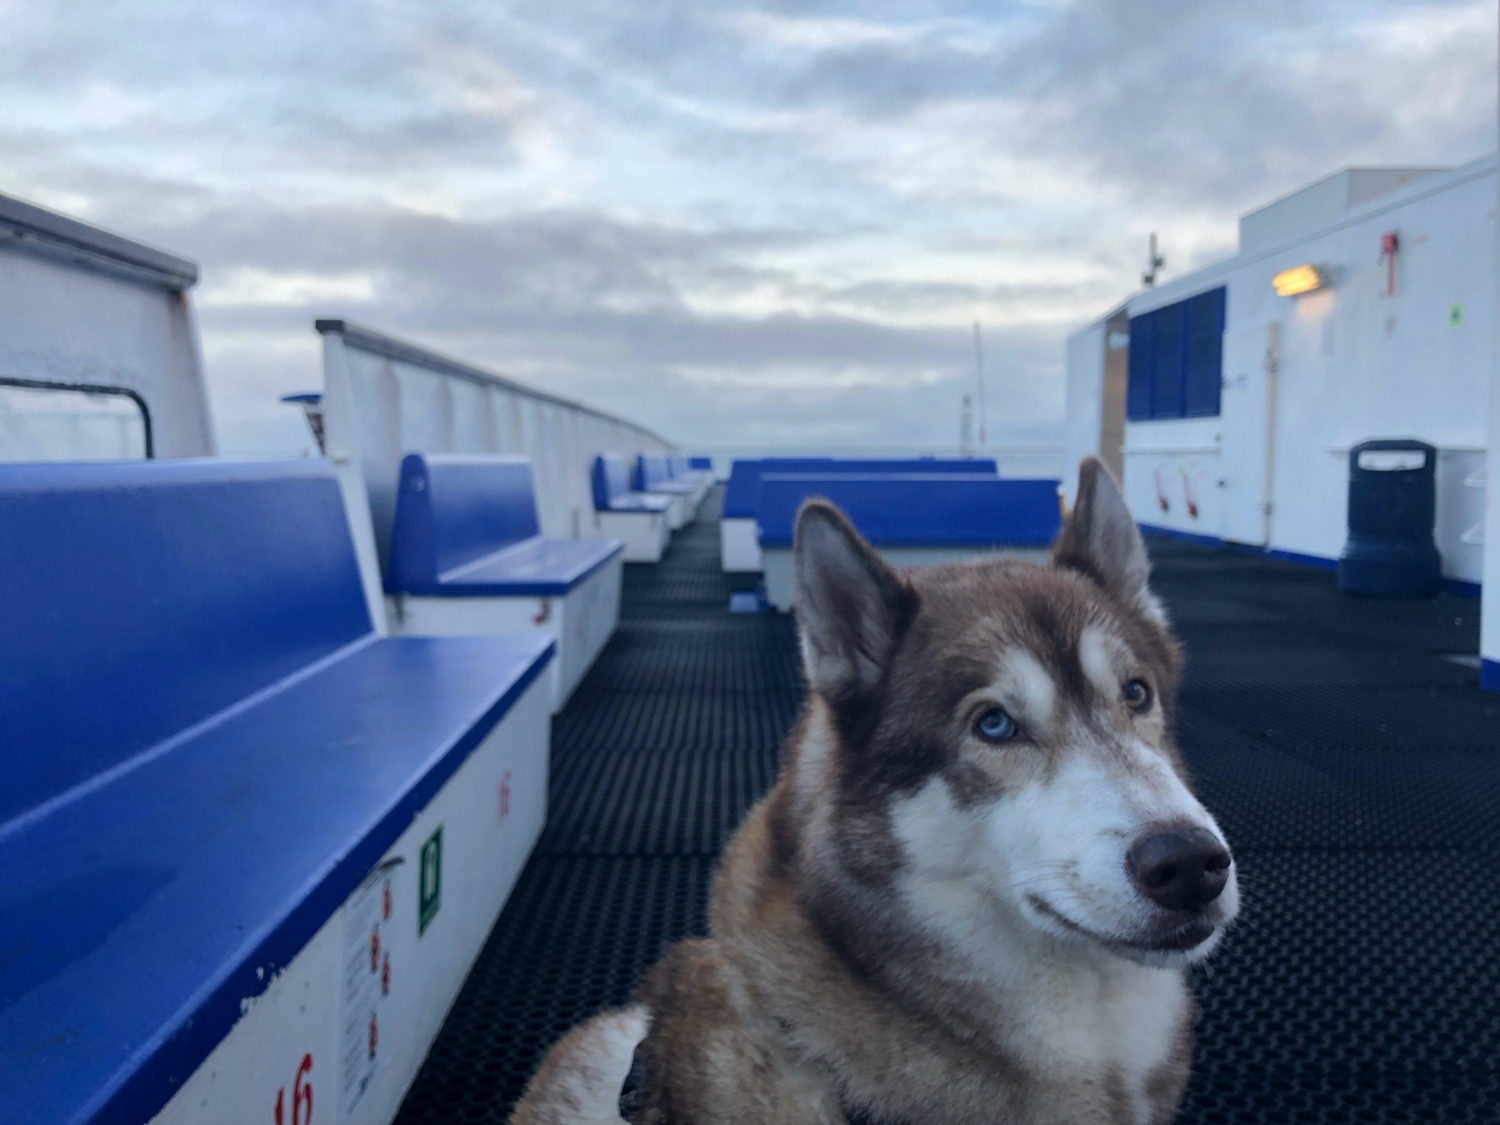 Oskar on the top deck of a ferry, looking fed up at the camera.